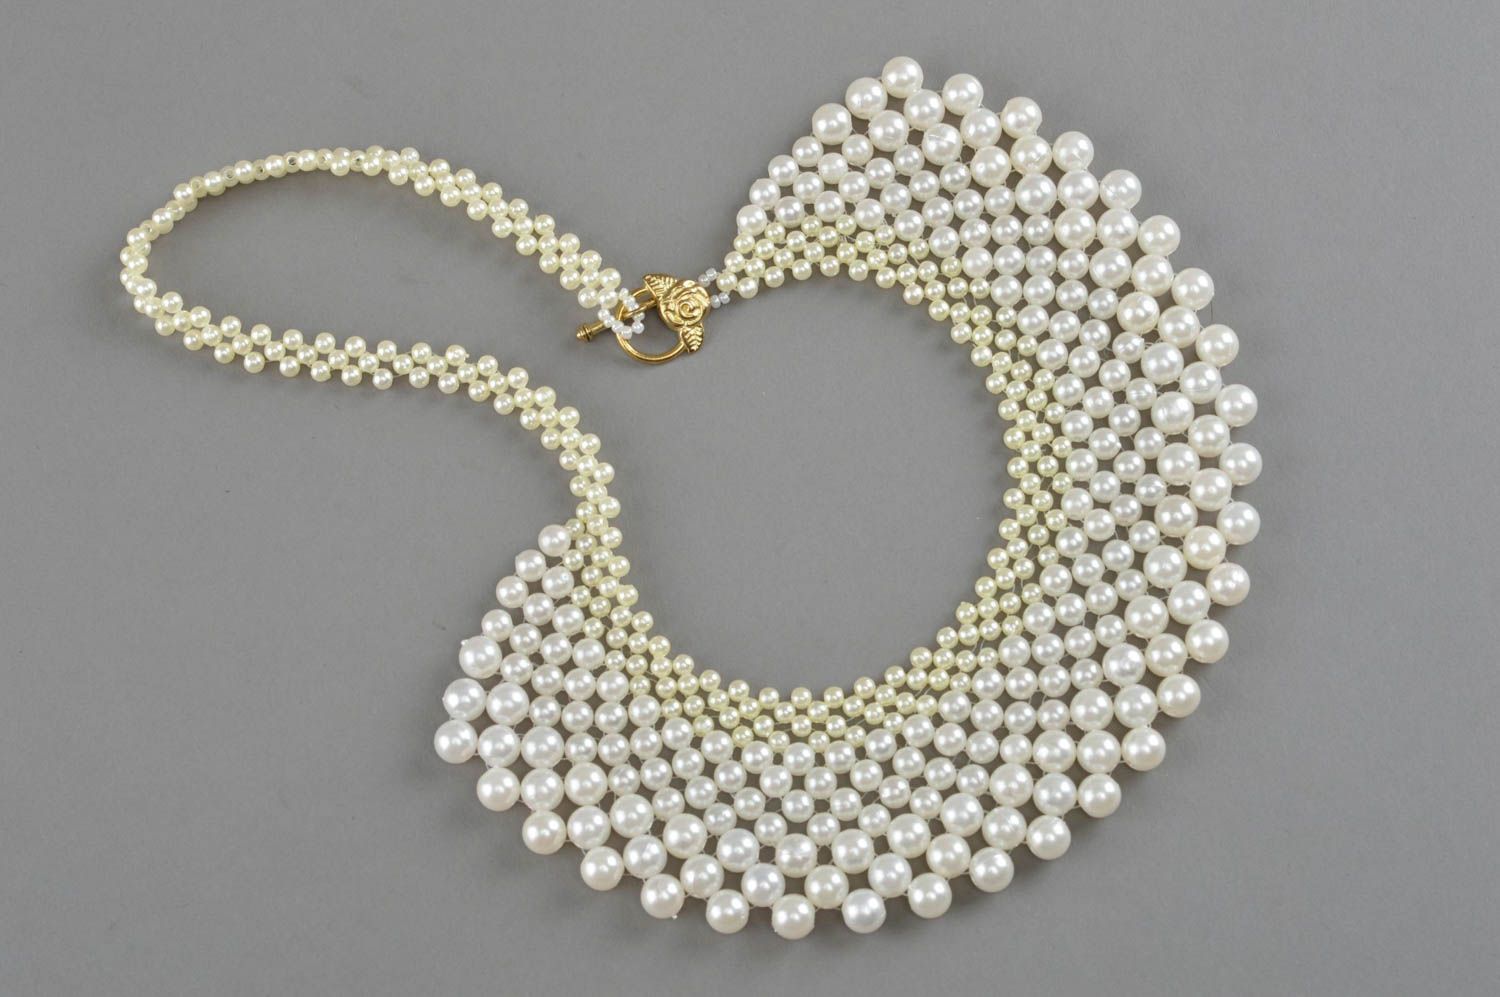 Necklace made of white beads handmade accessory for girls stylish beaded jewelry photo 2